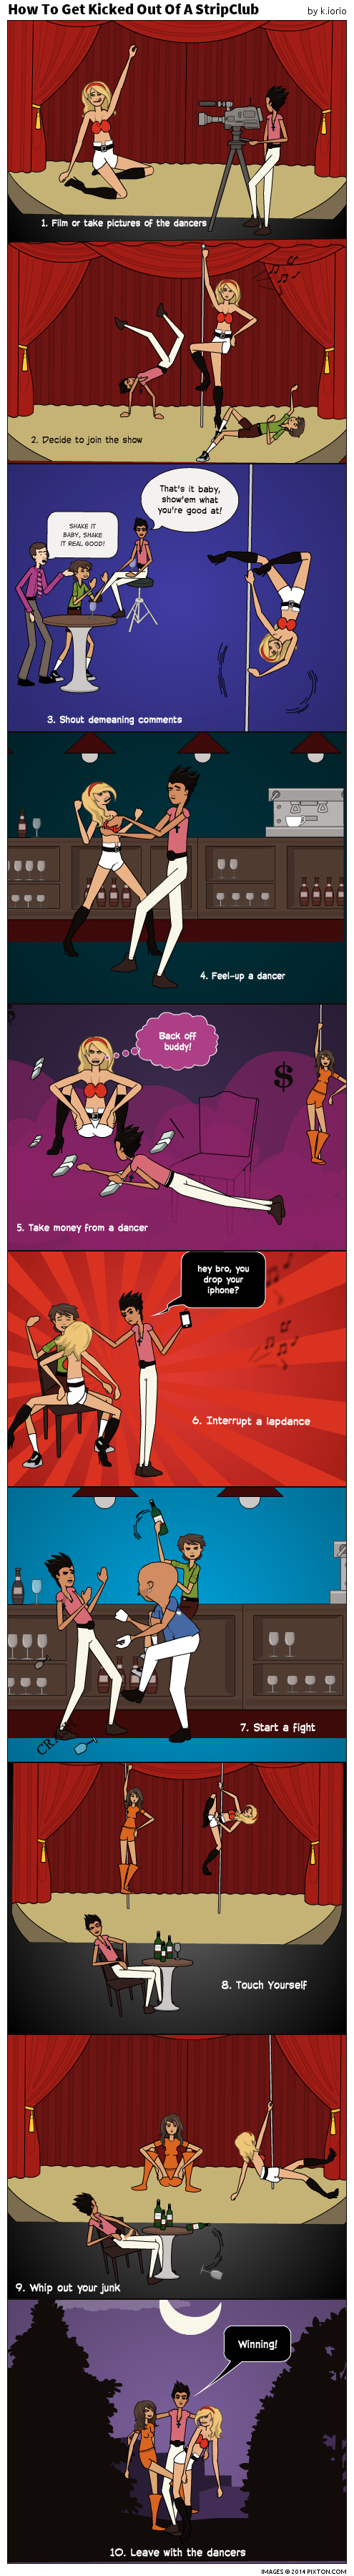 Pixton_Comic_How_To_Get_Kicked_Out_Of_A_StripClub_by_k_iorio (1).png